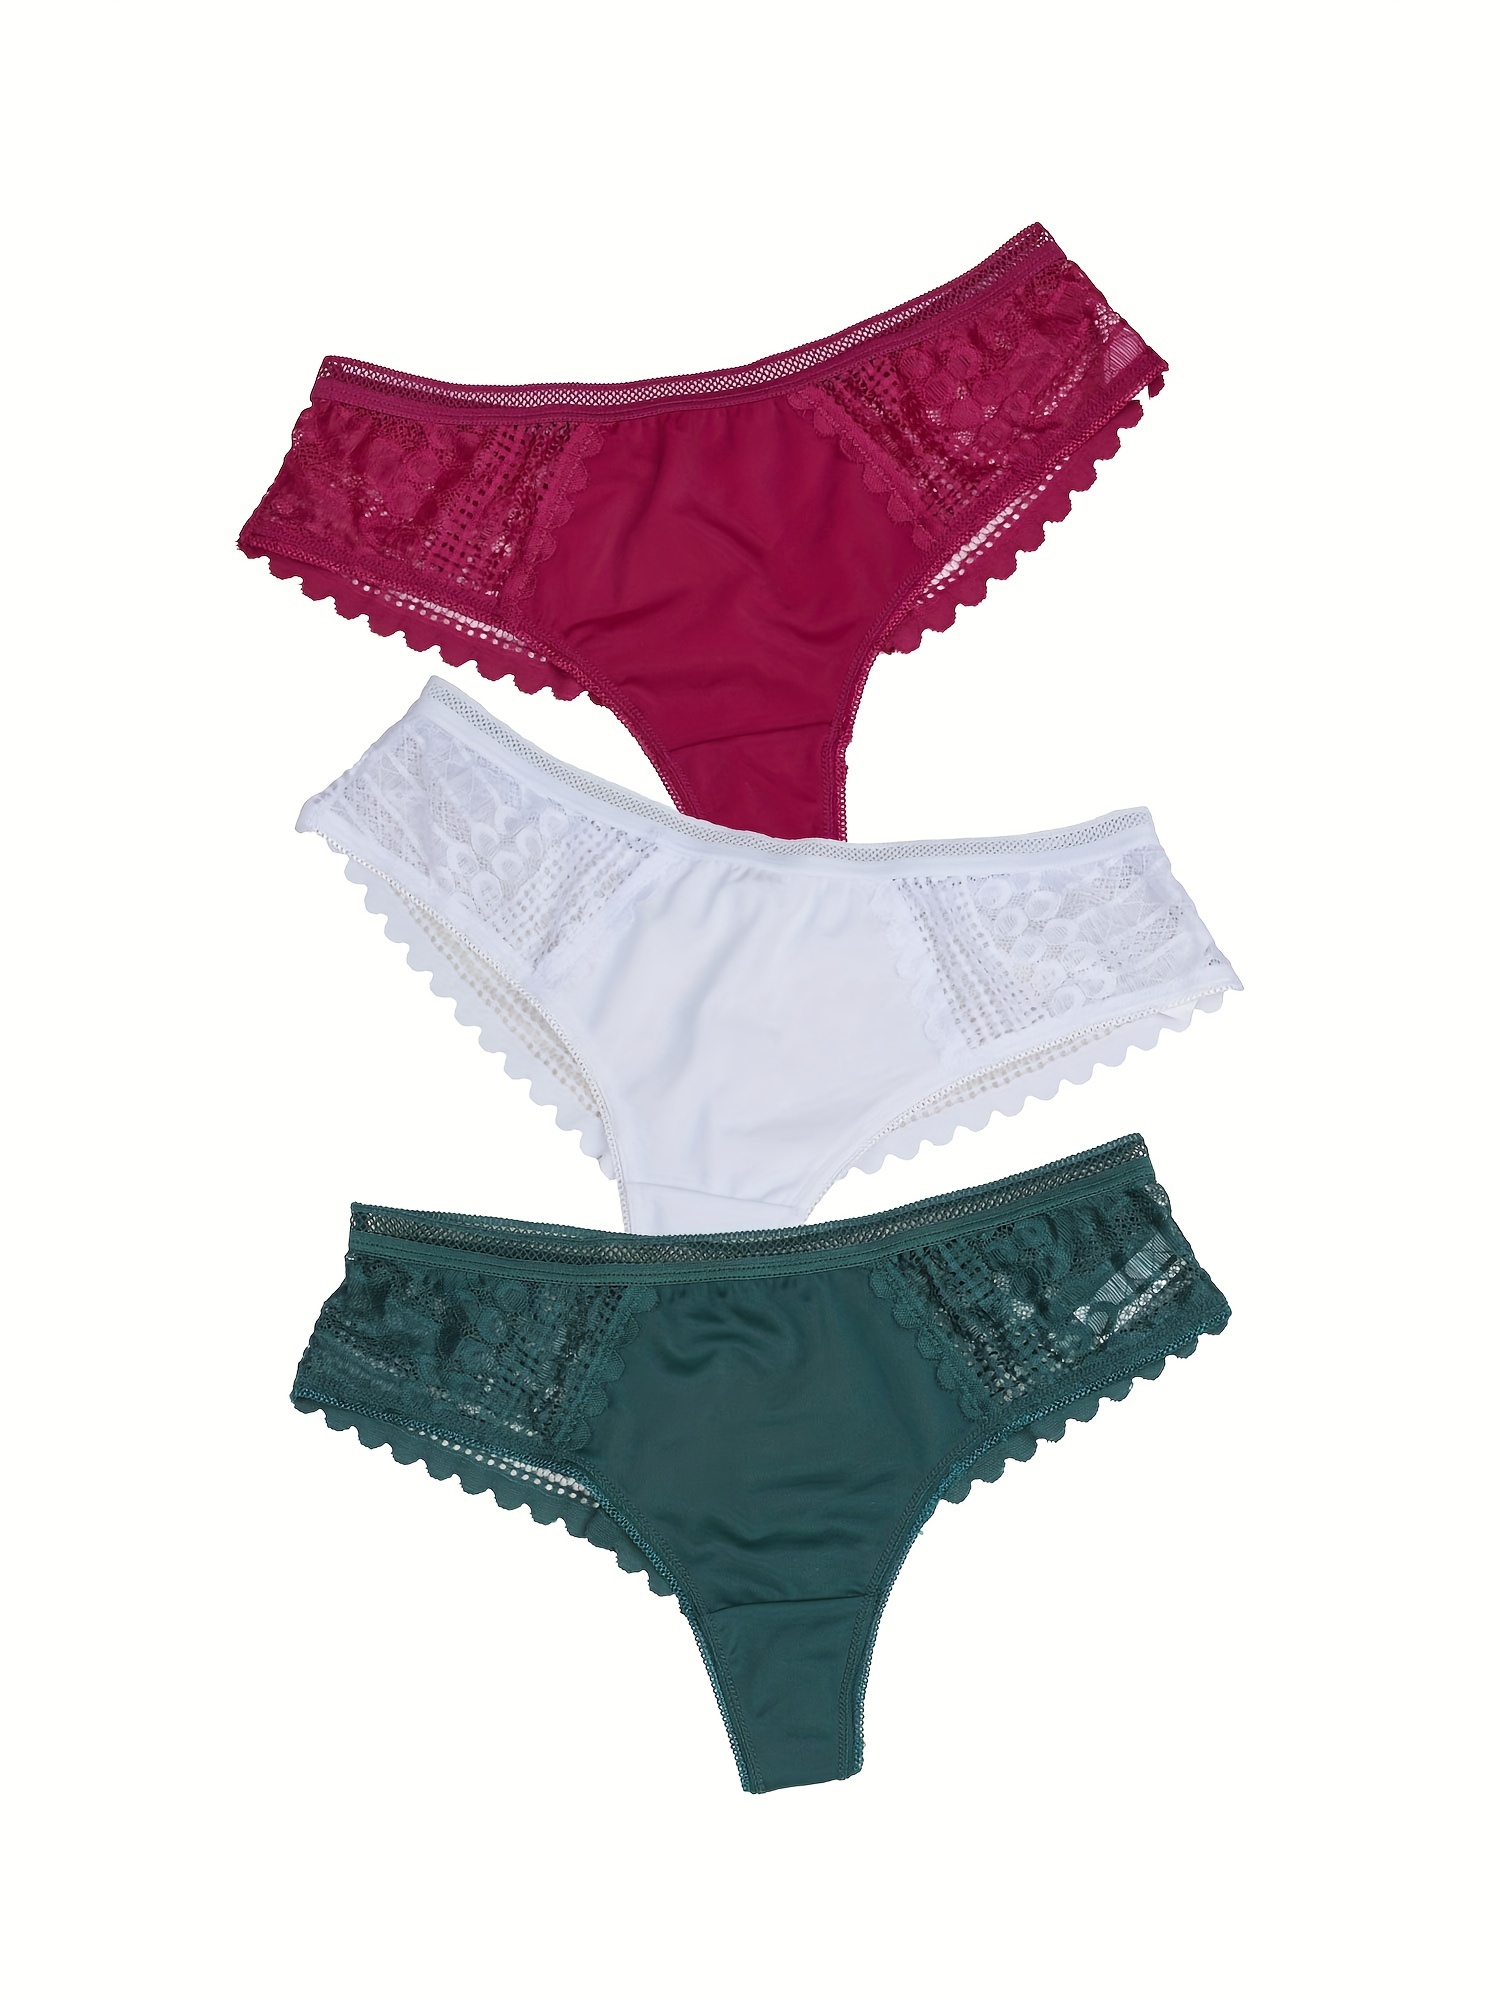 Floral Embroidered Lace Briefs: Erotic Low Waist Nylon Underpants